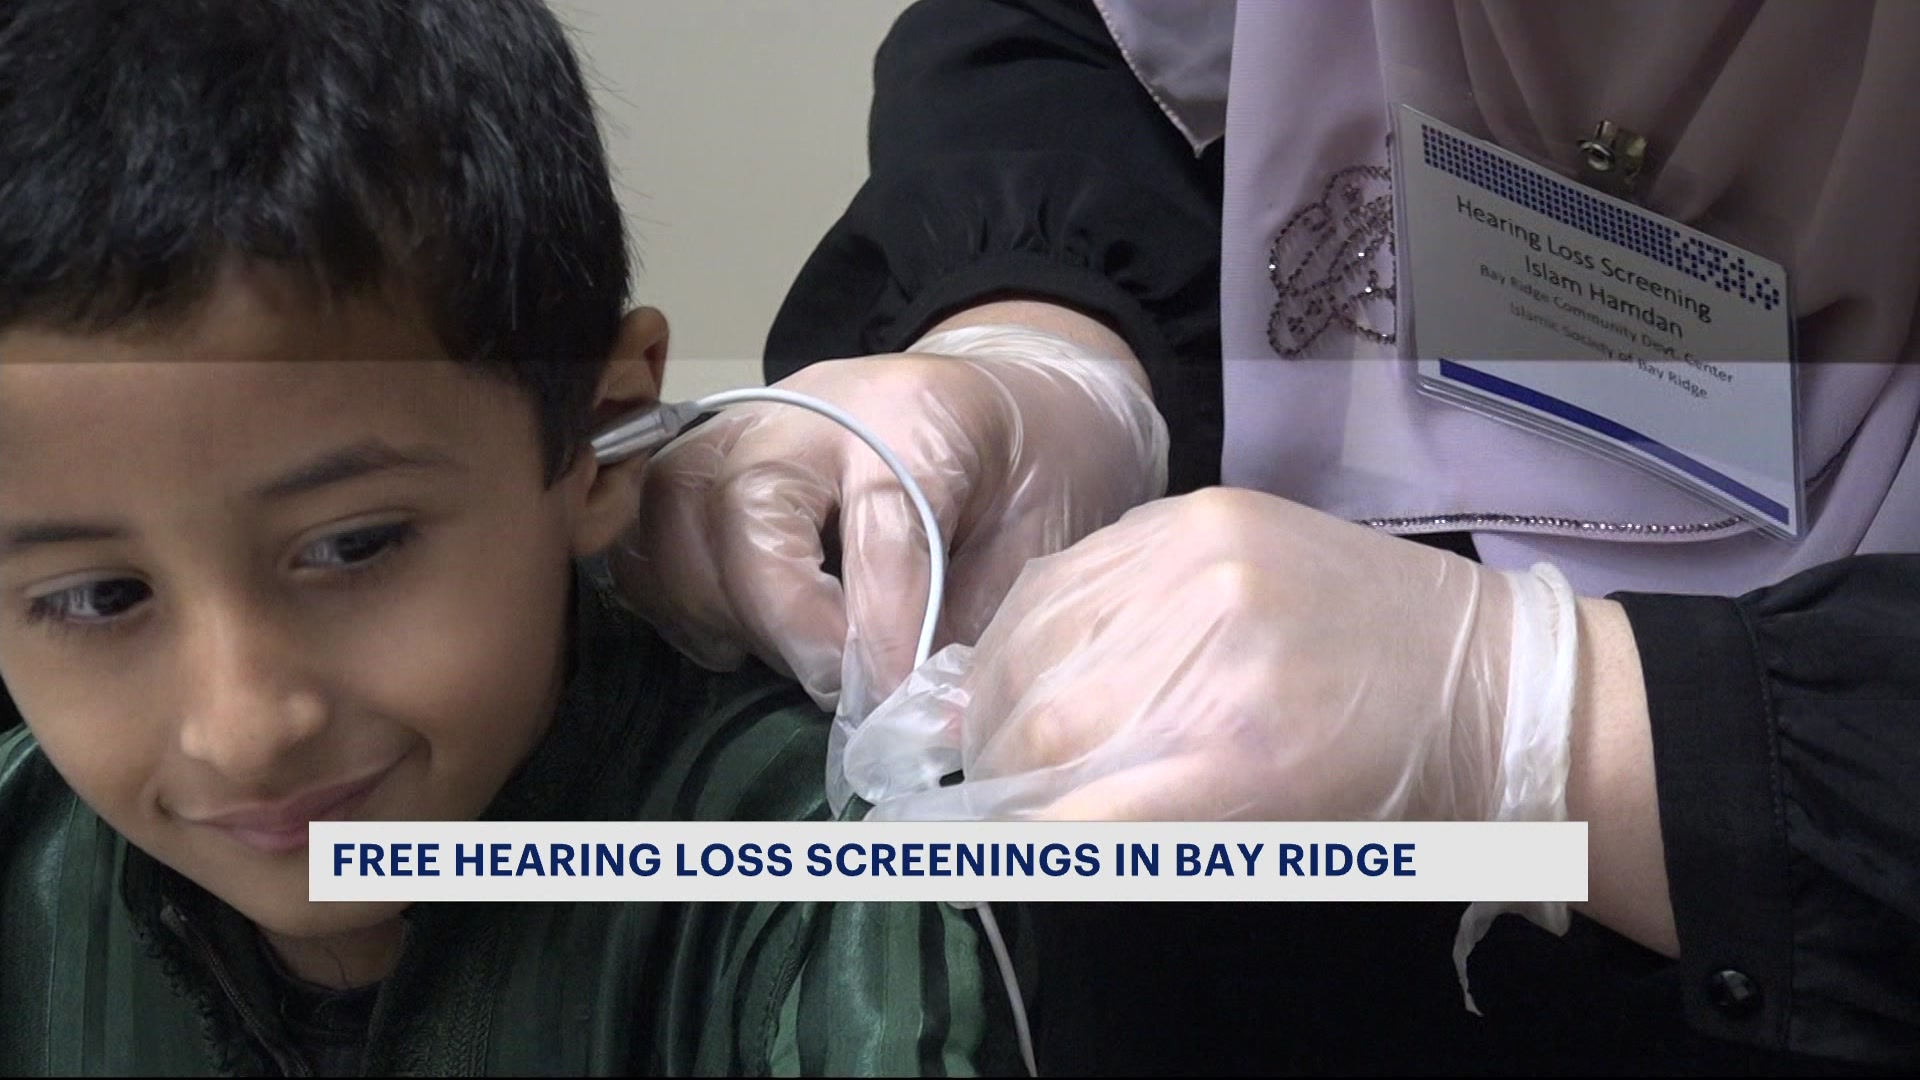 New program brings awareness to hearing loss in underserved communities